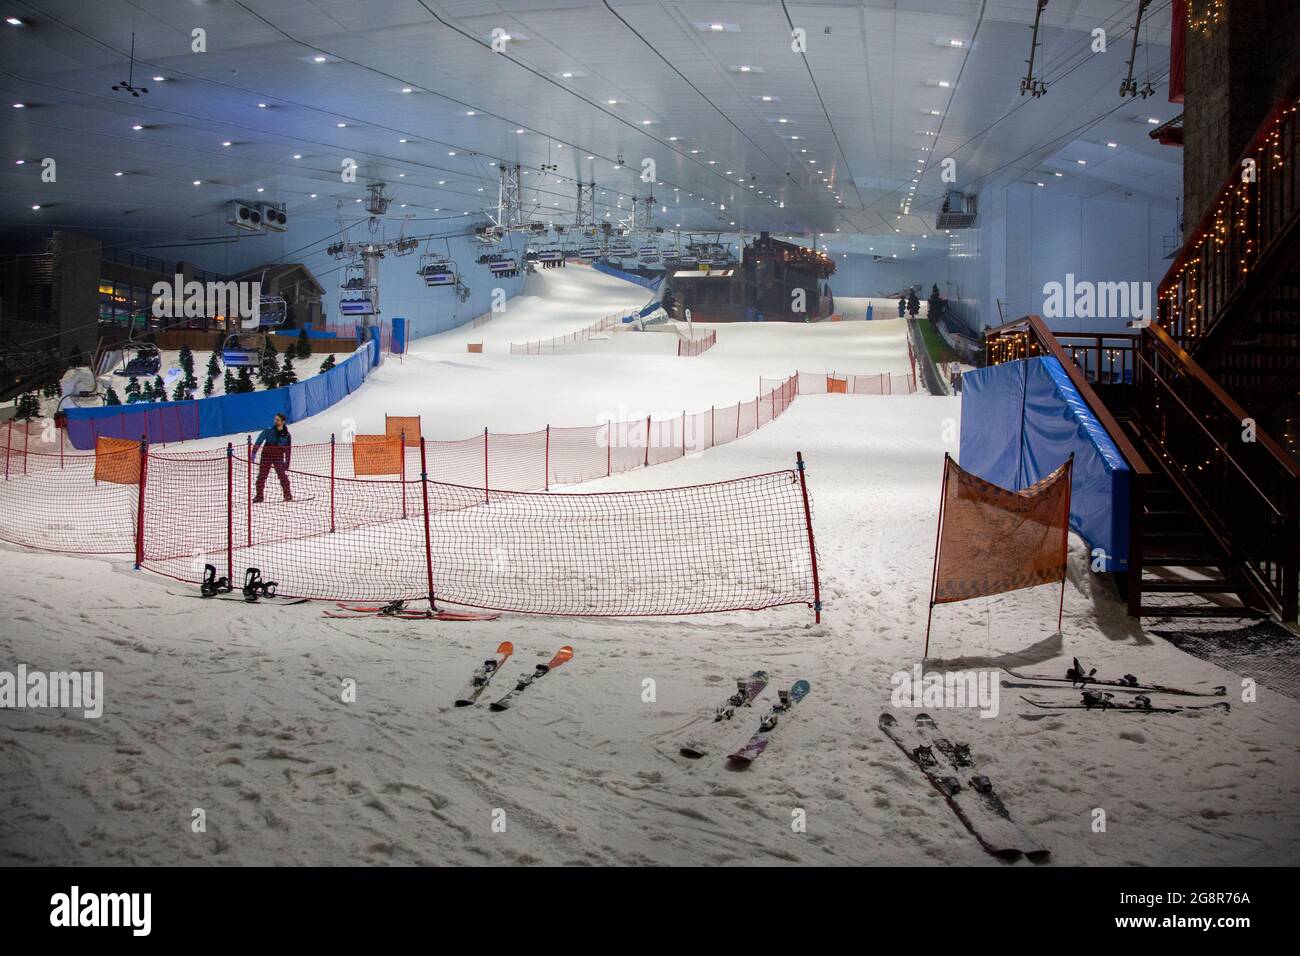 Ski Dubai is an indoor ski resort with 22,500 square meters of indoor ski area. The park maintains a temperature of -1 degree to 2 degrees Celsius thr Stock Photo